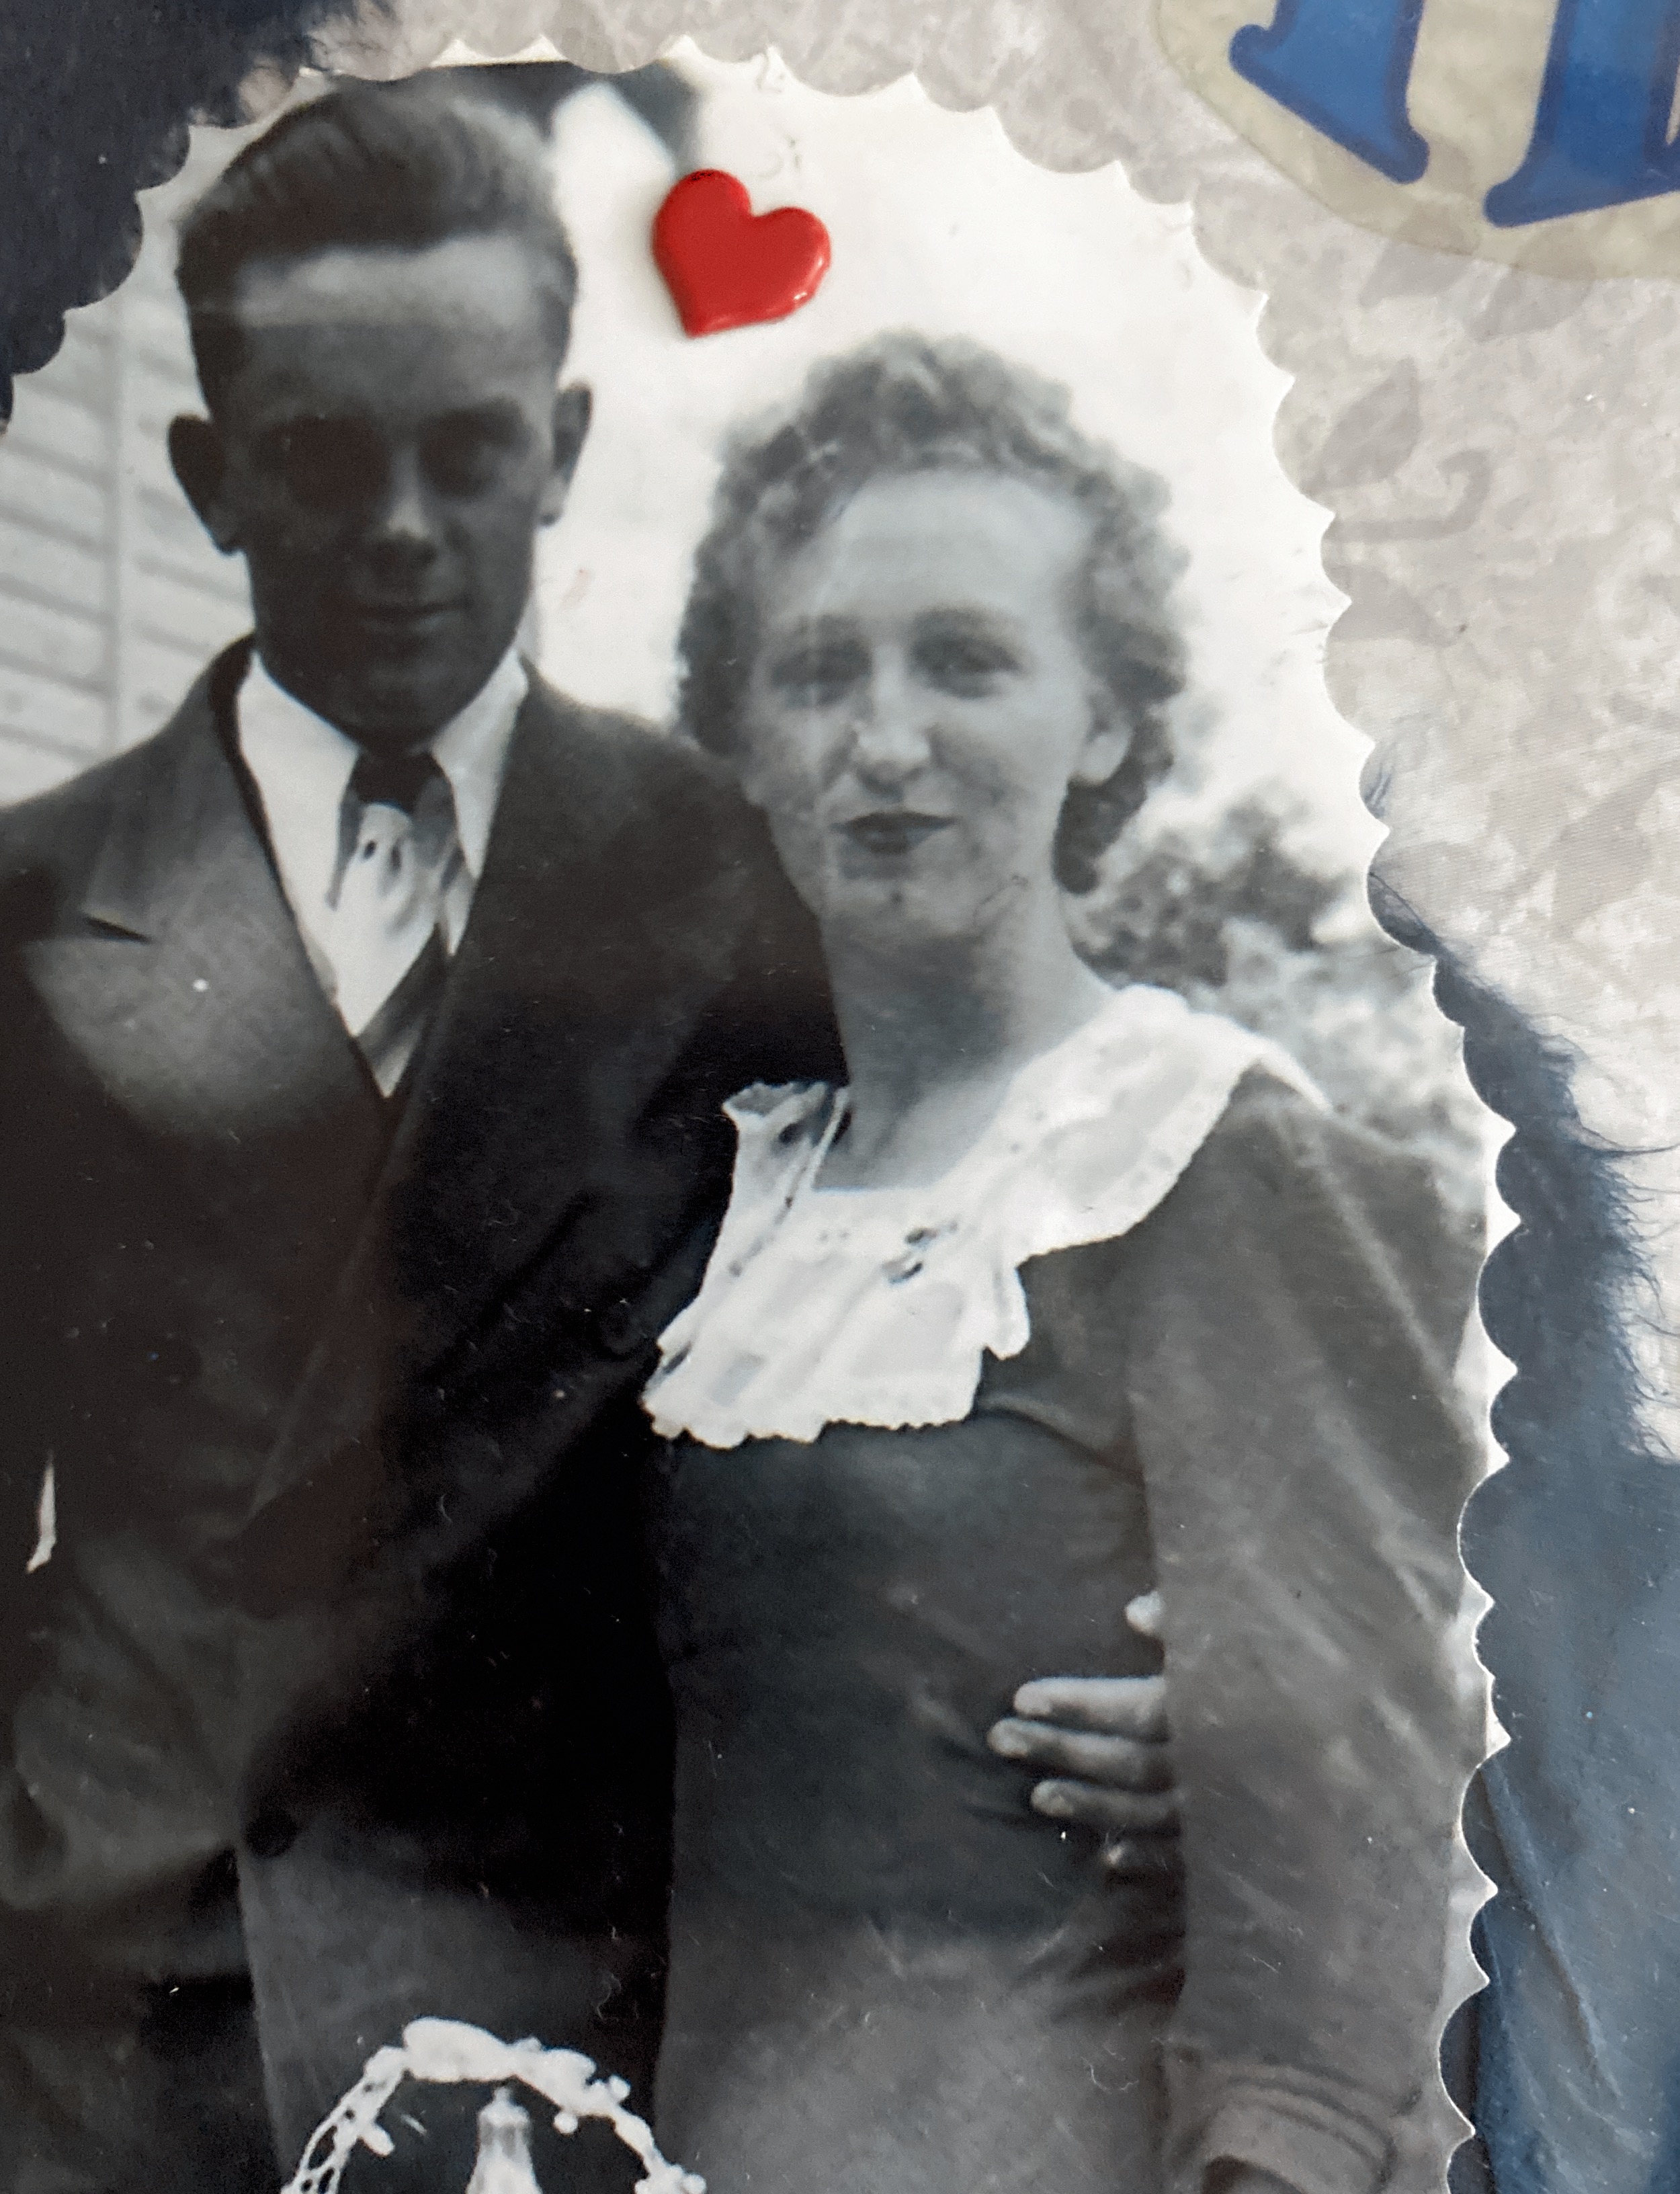 Wedding photo of my parents, Stanley and Zelda (Gregory) Hill, July 18, 1943. They had 69yrs 4 months together.